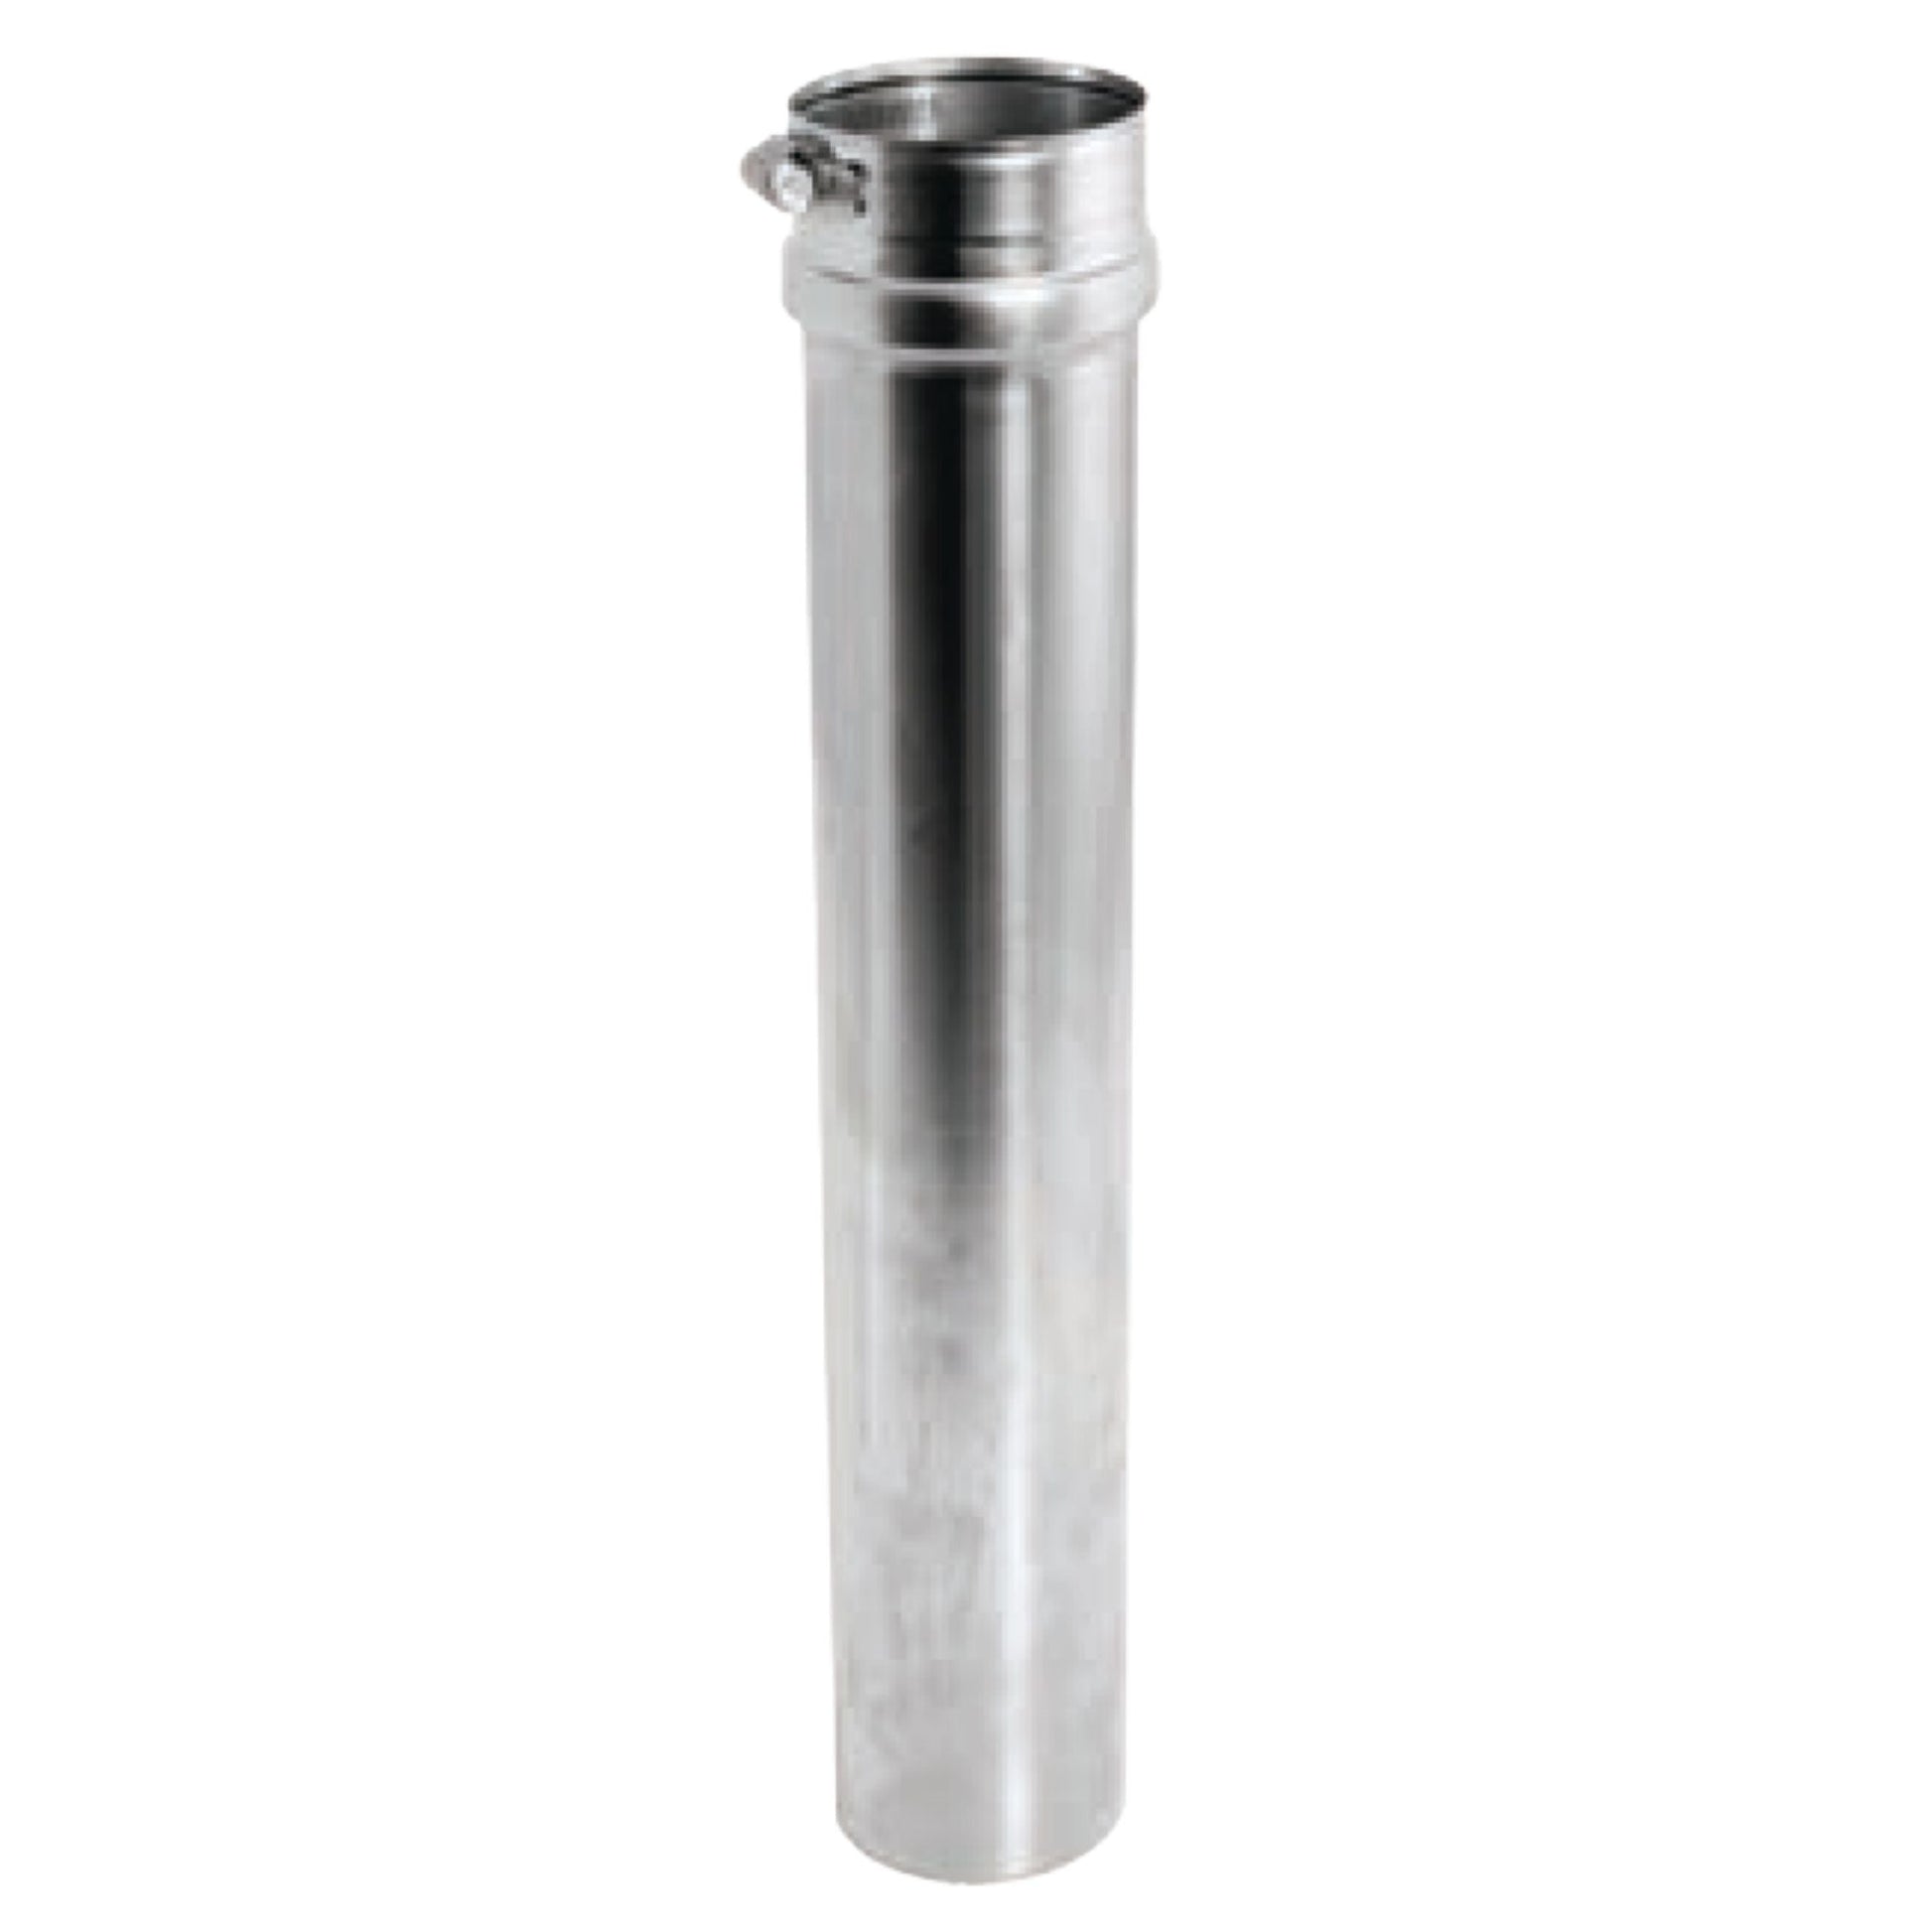 DuraVent FasNSeal 16" x 18" 29-4C Stainless Steel Adjustable Vent Length